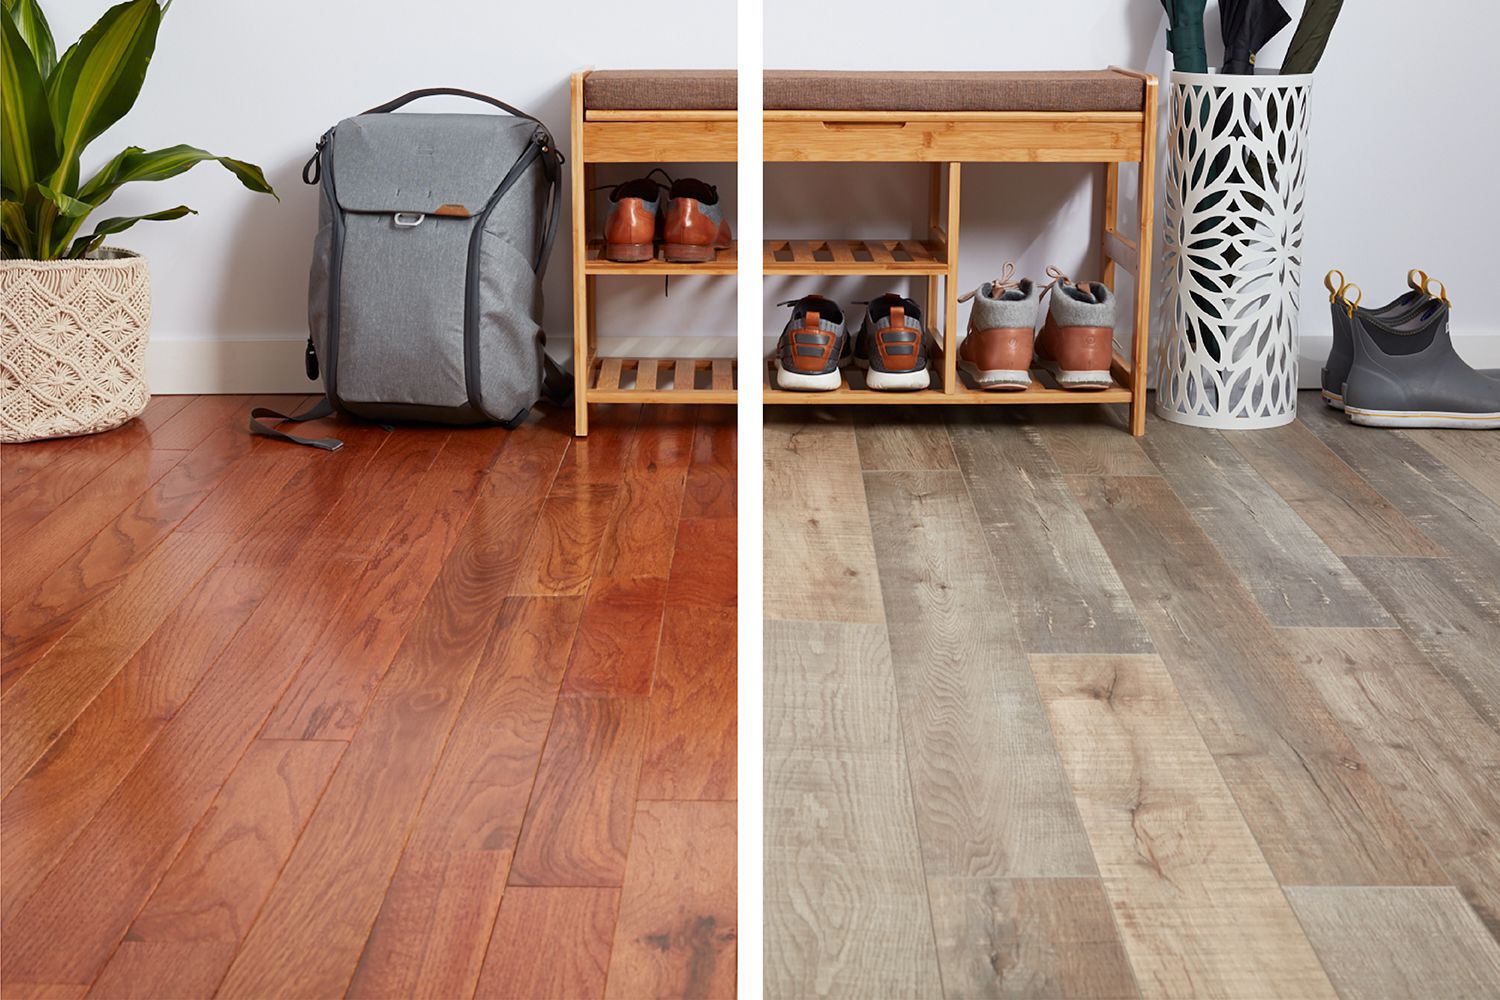 Laminate vs. Hardwood: Which Is Better?